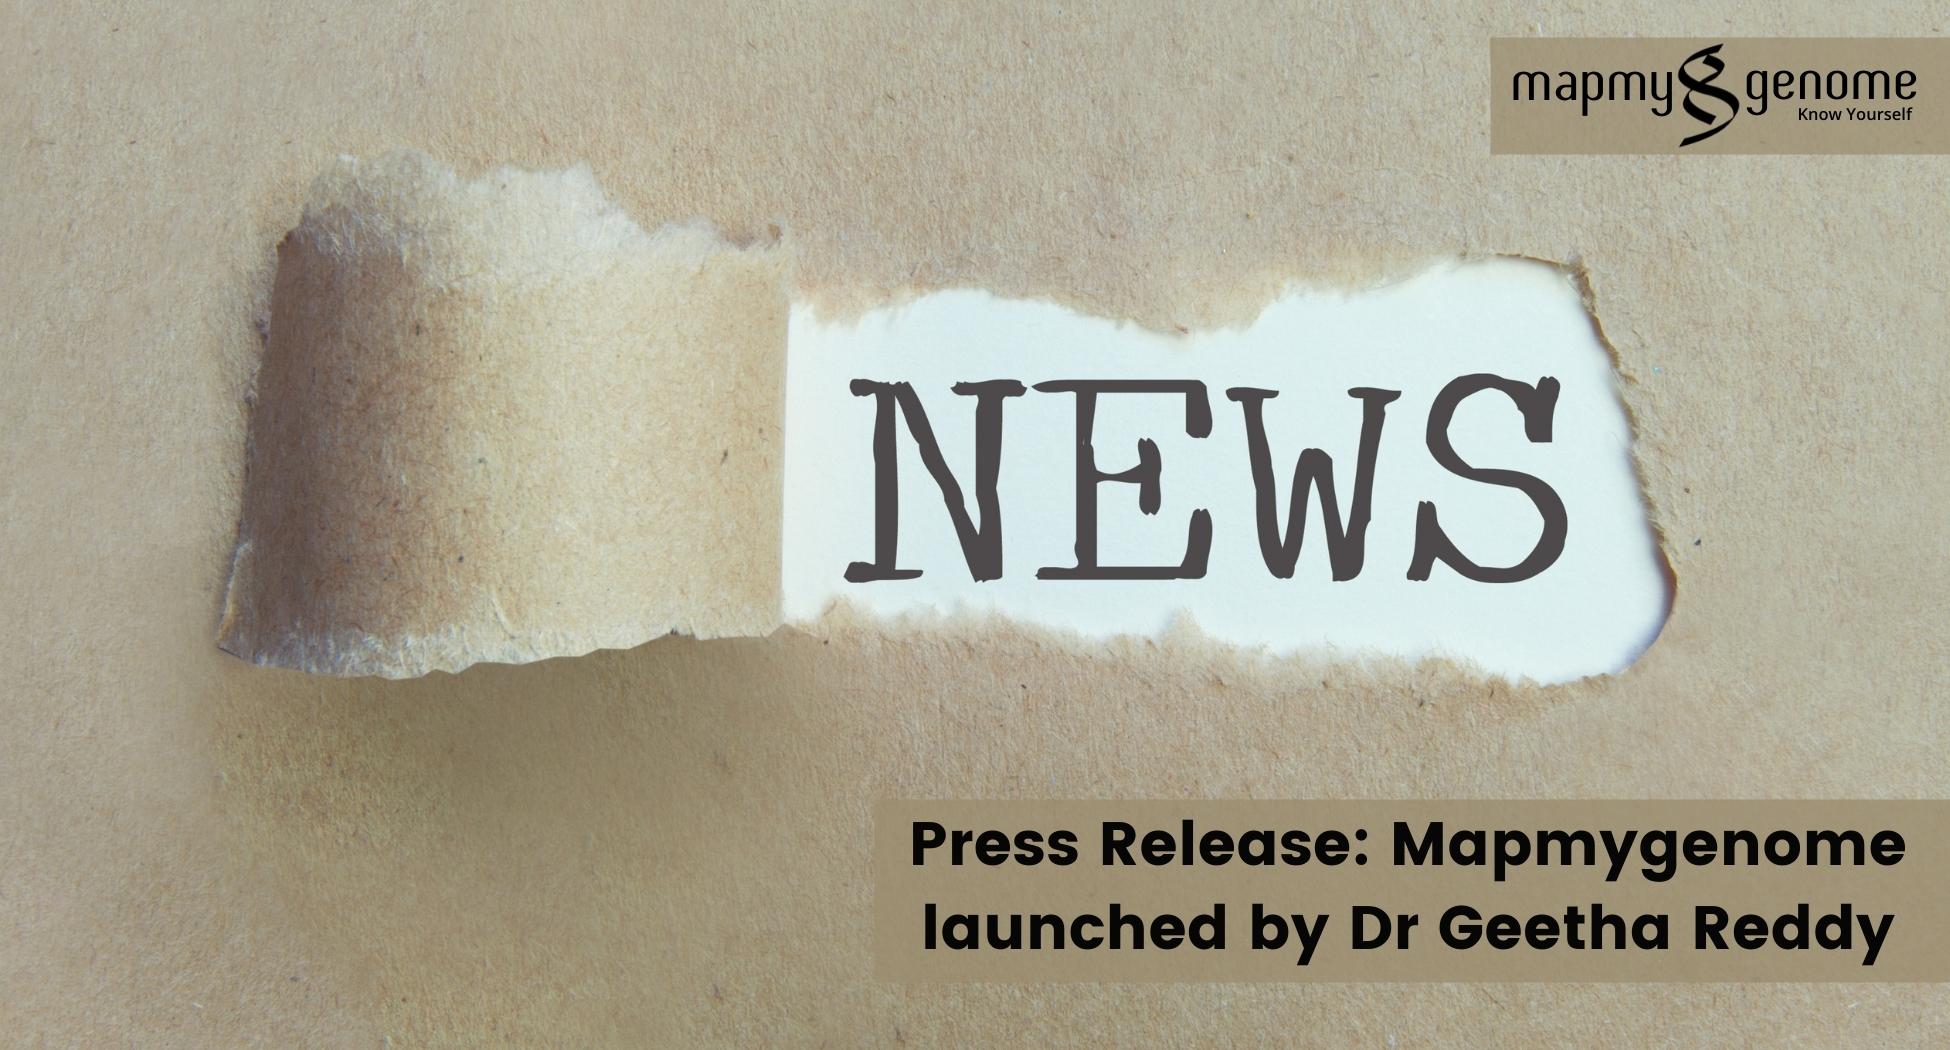 Press Release: Mapmygenome launched by Dr Geetha Reddy